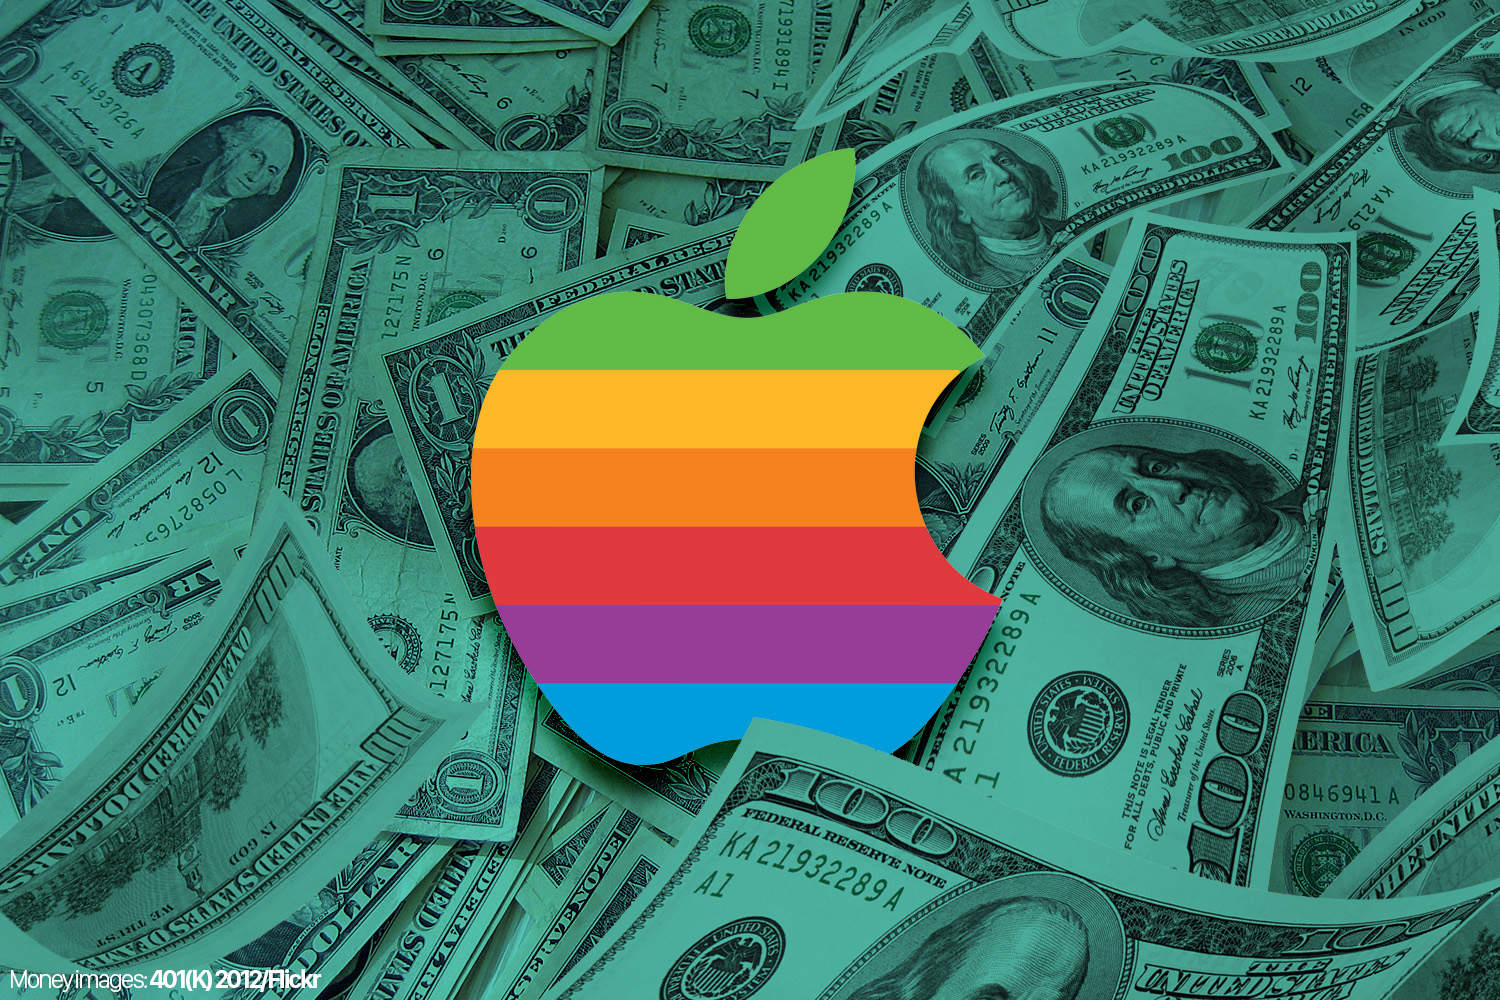 Apple is worth more than the entire US energy sector combined